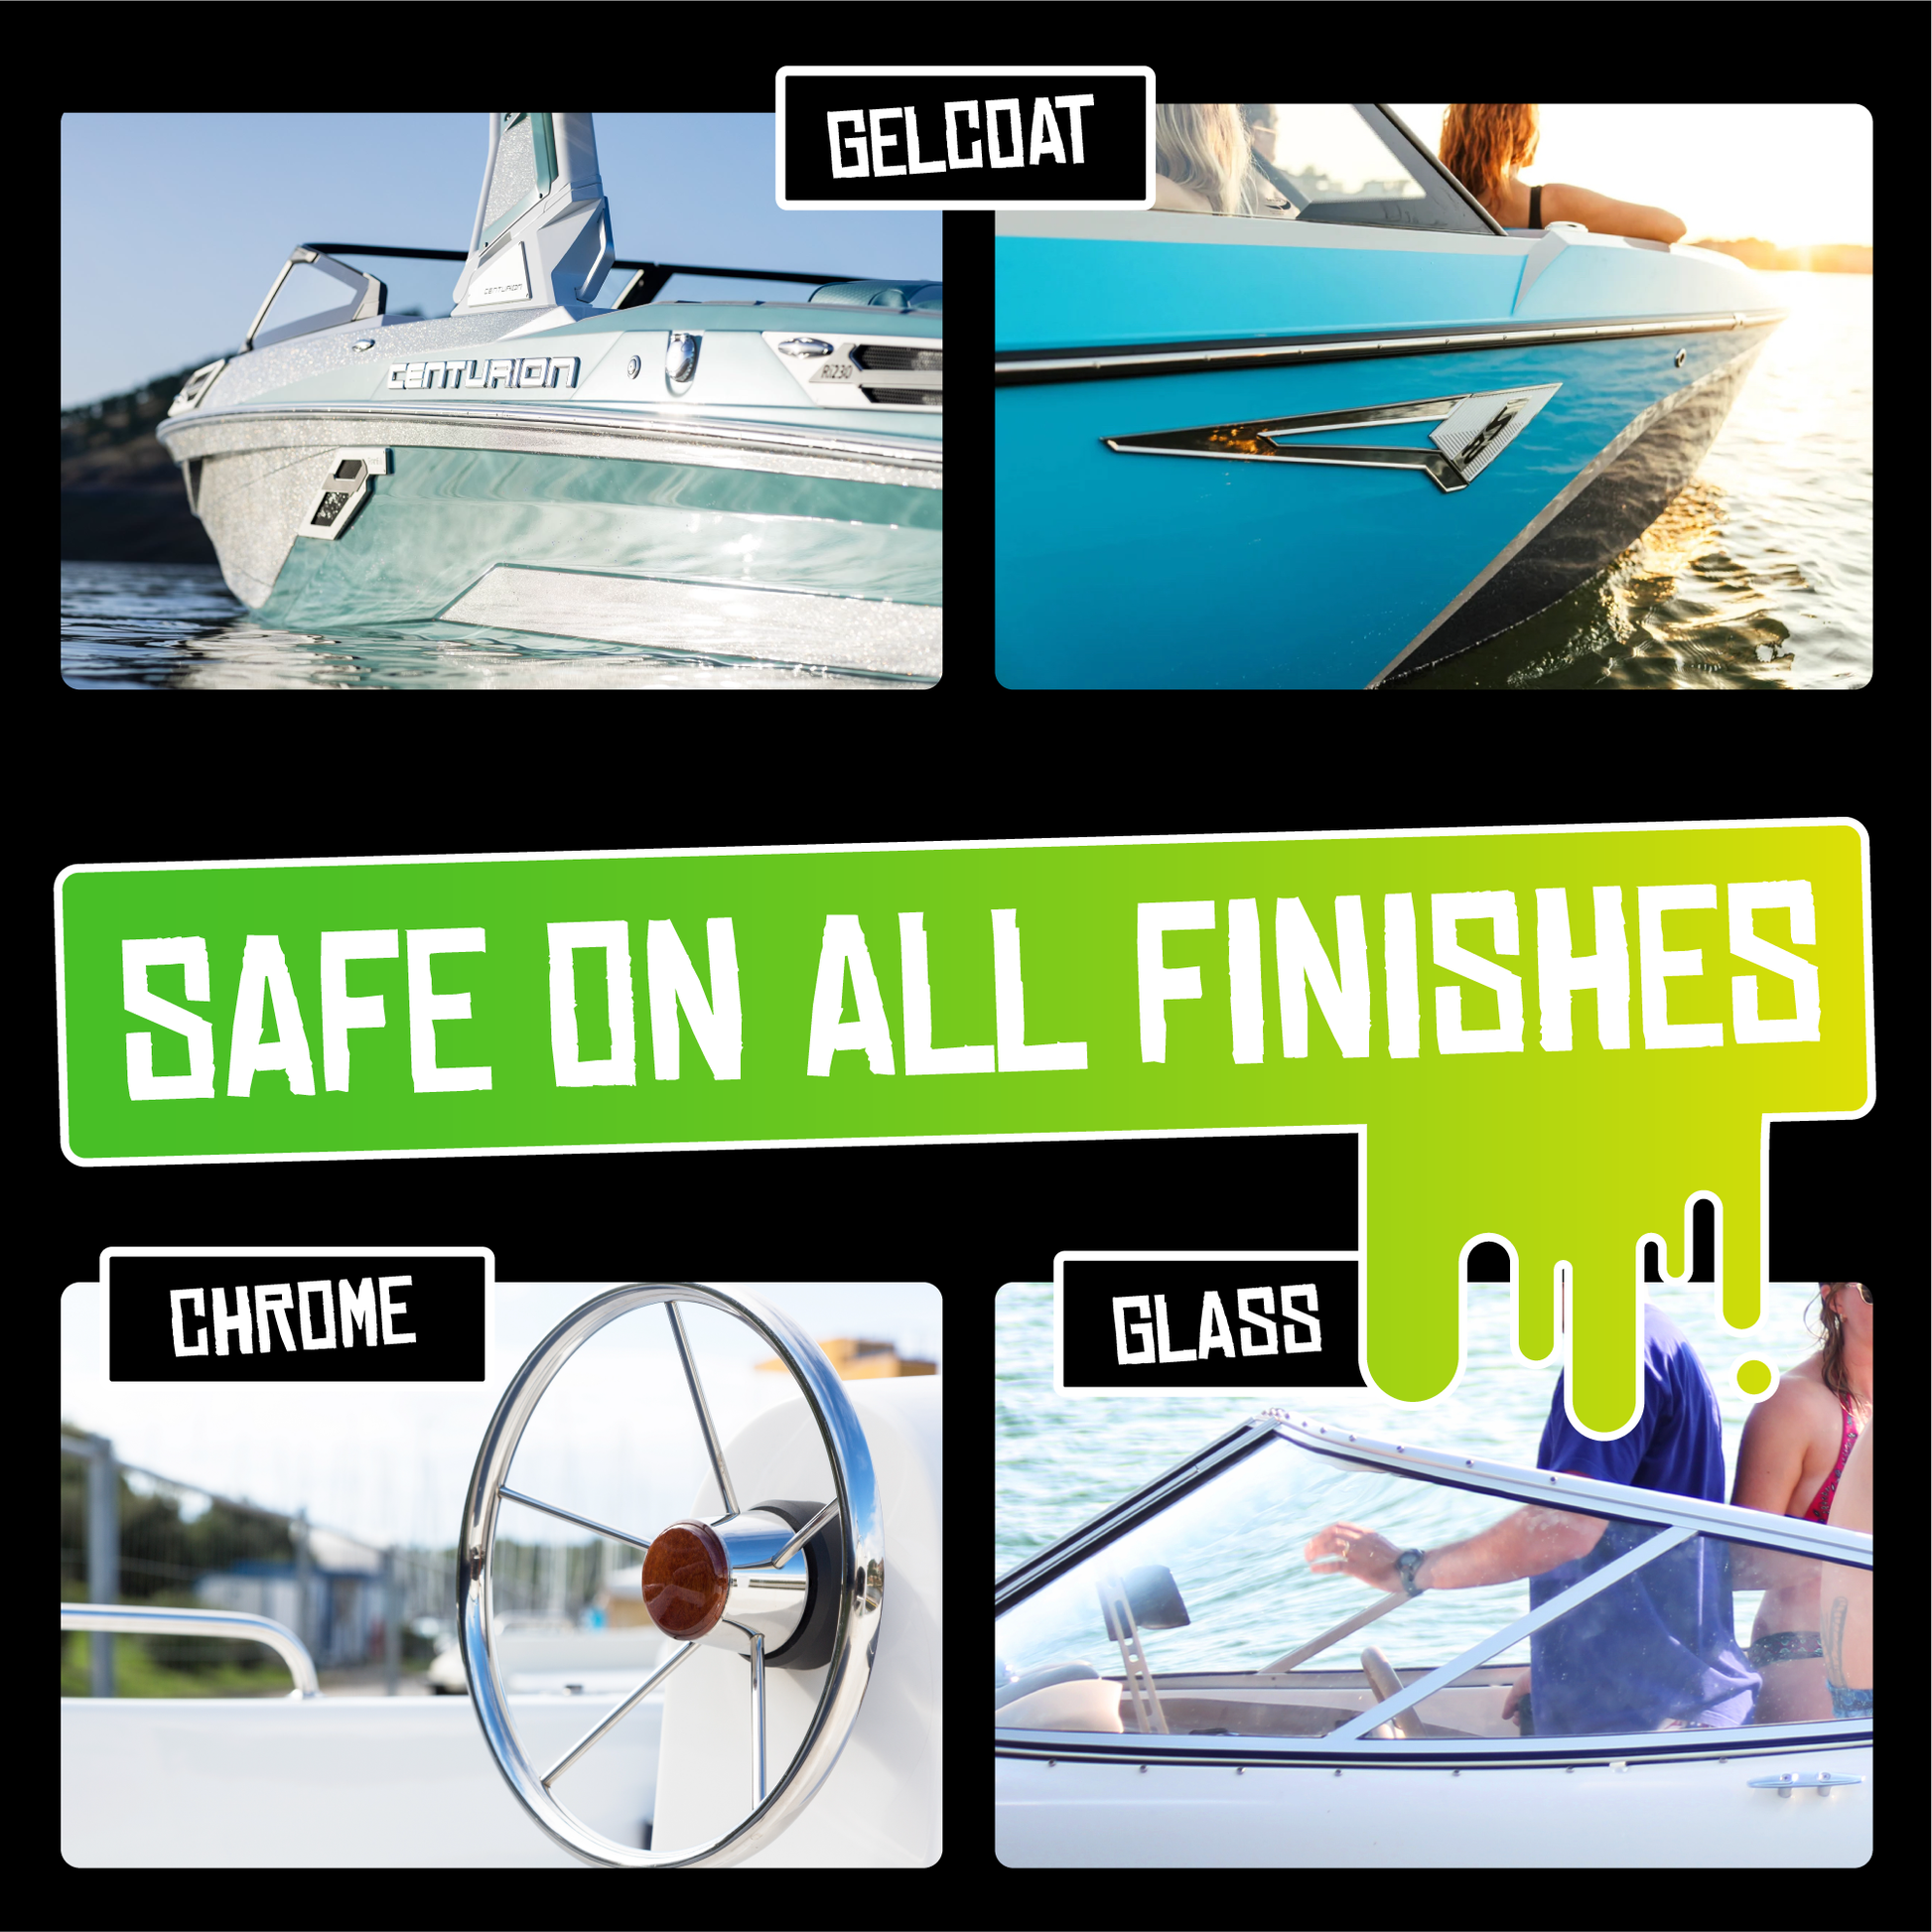 Boat Juice Exterior Boat Cleaner - Boat Water Spot Remover & Ceramic Sealant - Boat Cleaner for Fiberglass, Boat Wax Spray, Boat Cleaning & Detailing